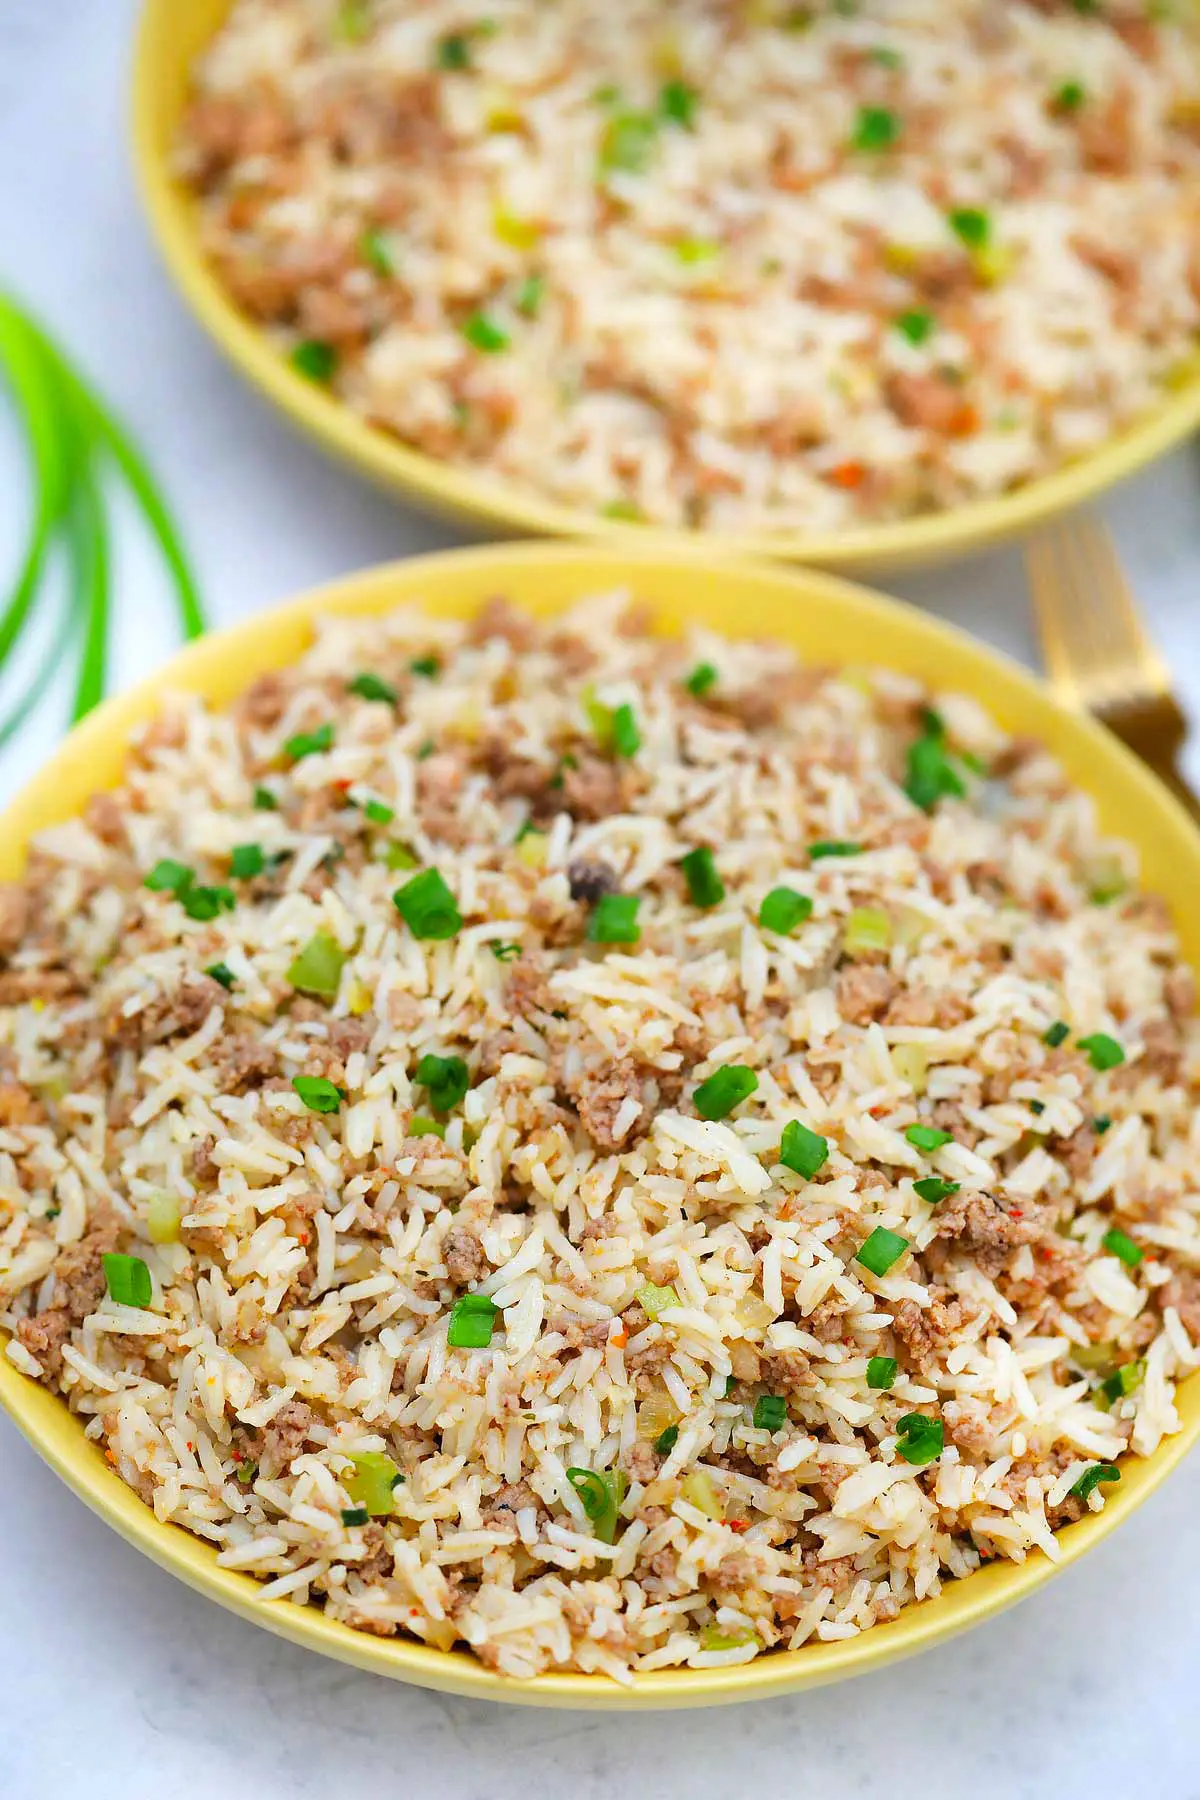 Dirty Rice Recipe - Sweet and Savory Meals